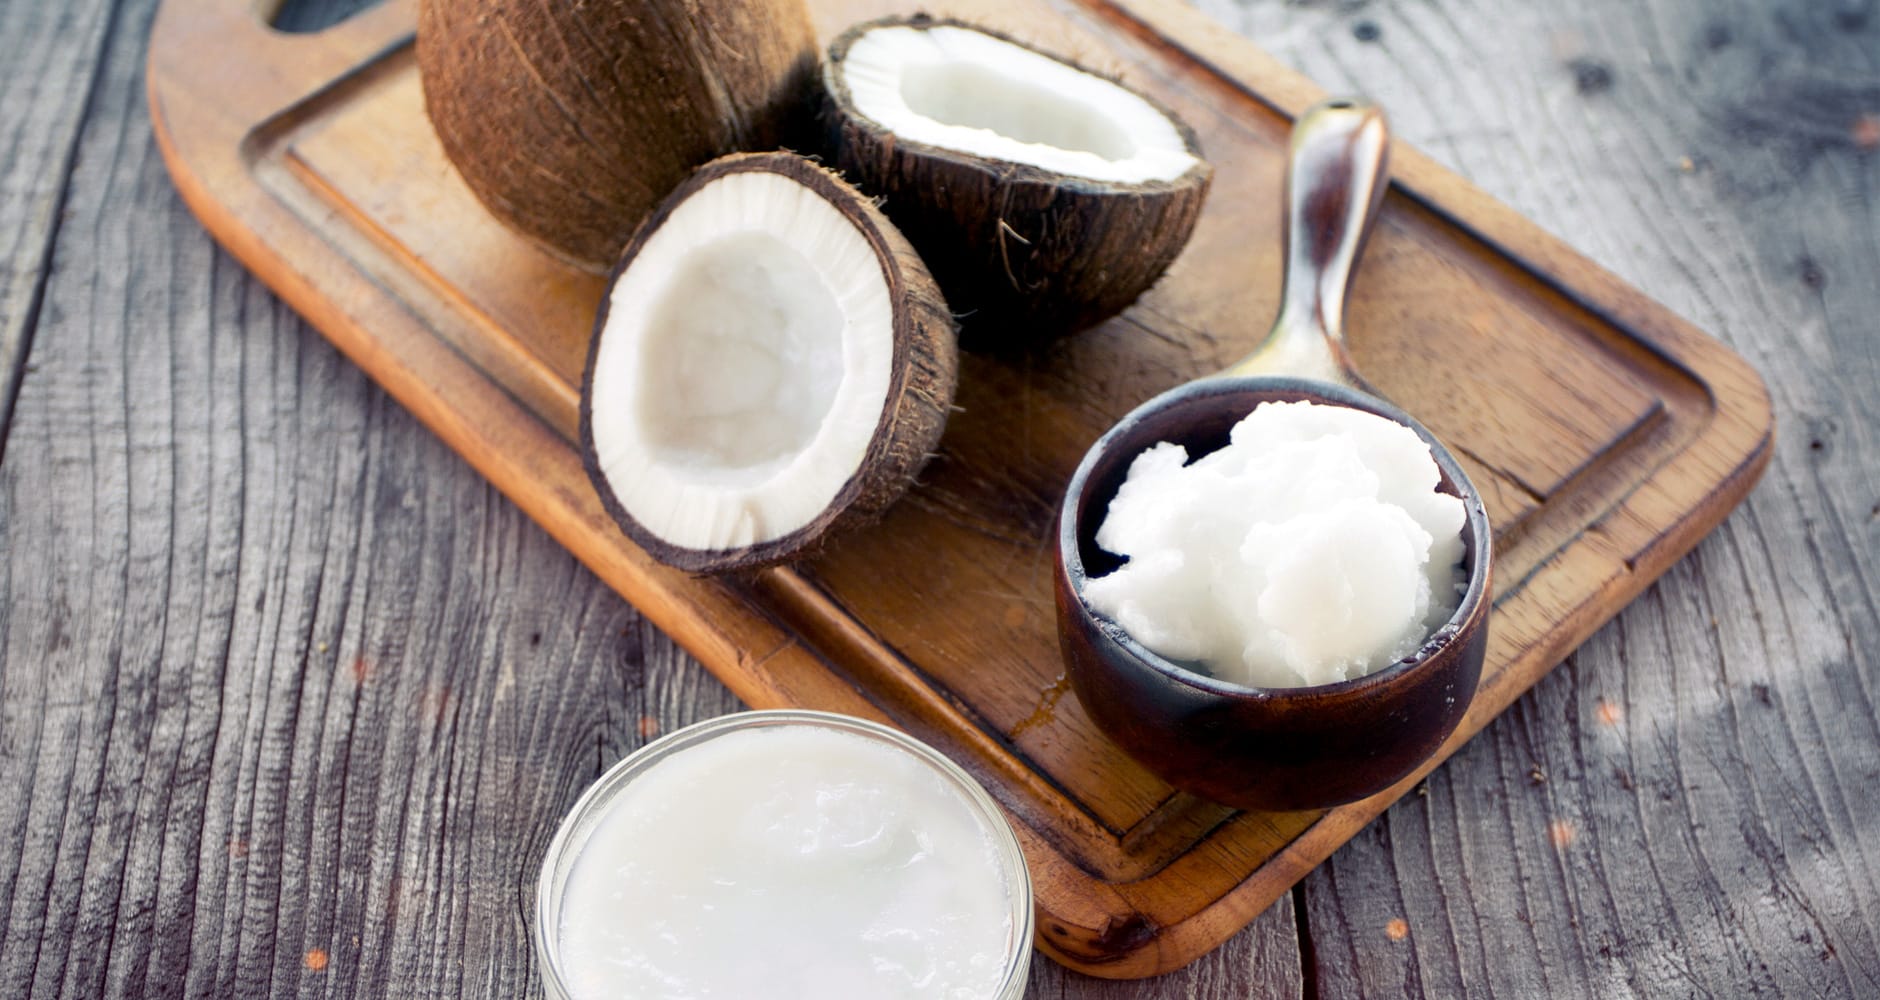 Coconut oil is a good carrier oil when making your own sunscreen.